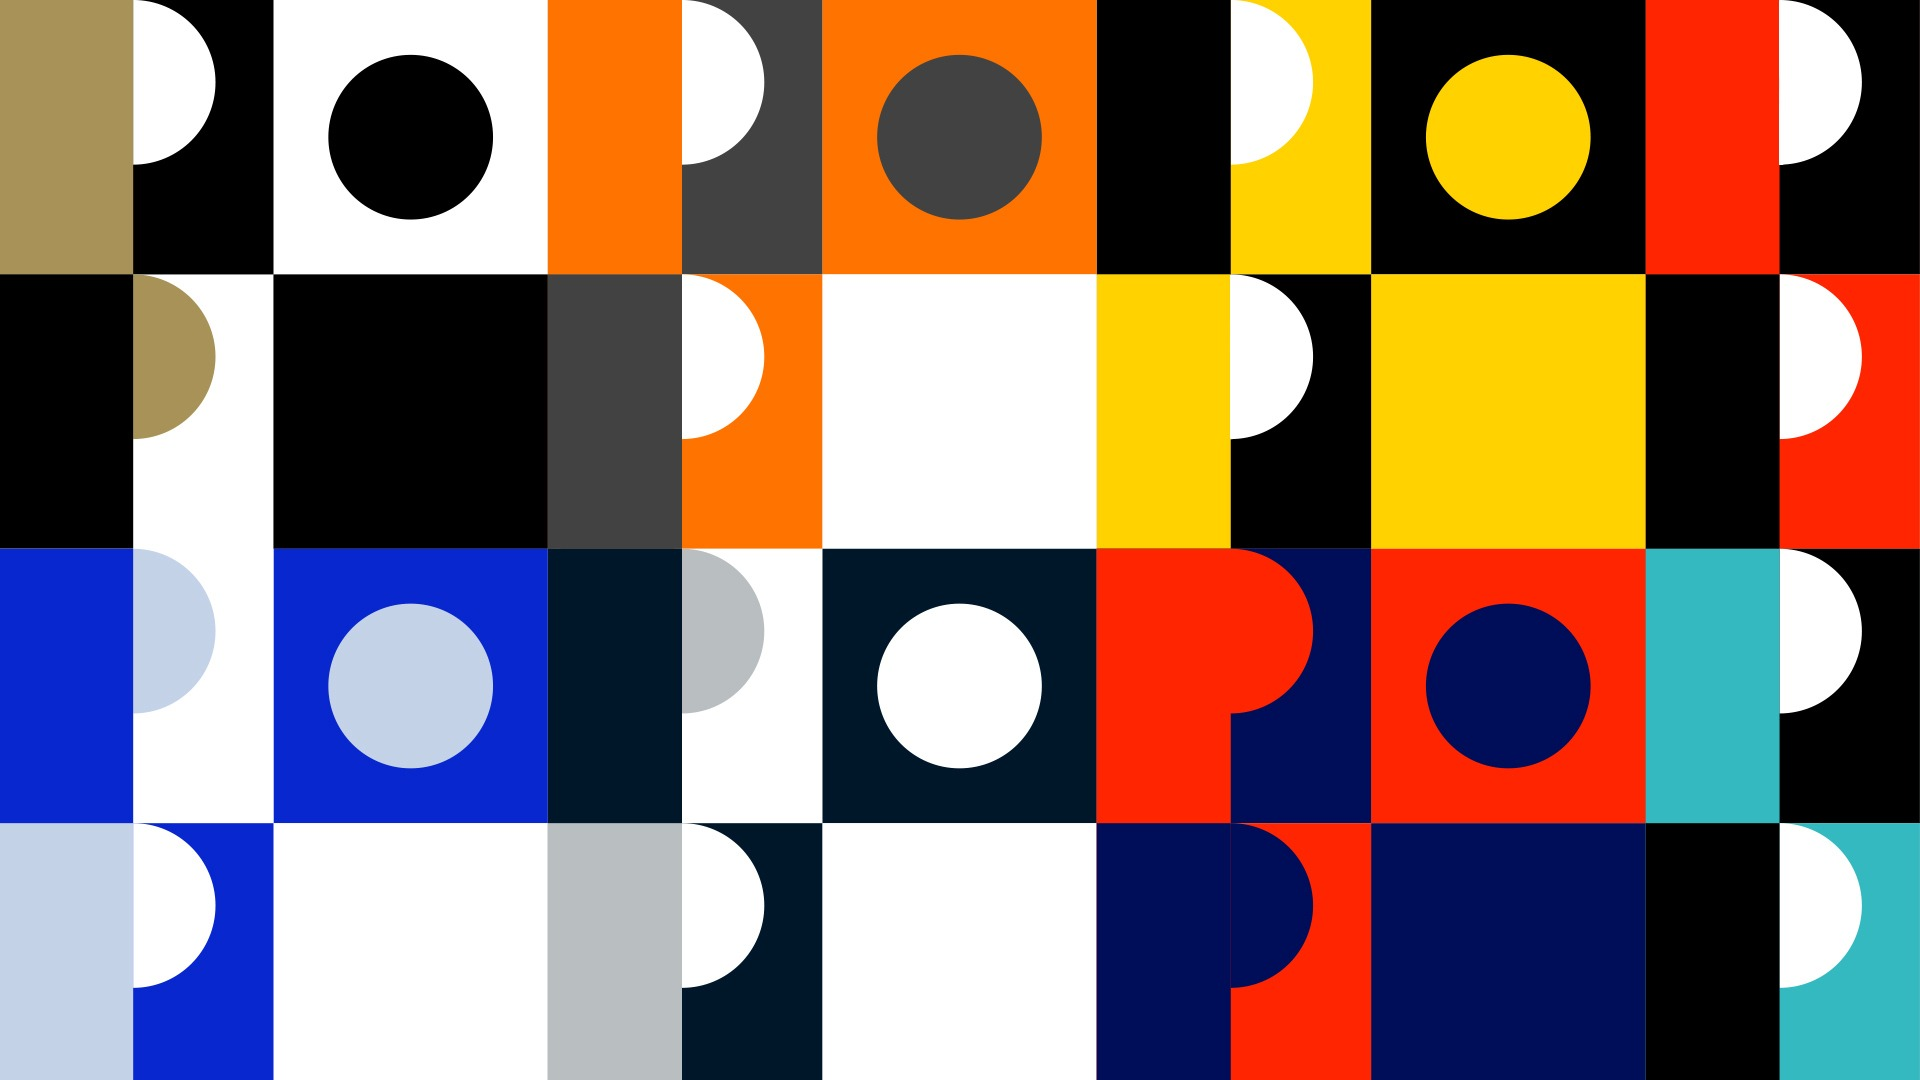 Geometric colour pattern in black, white, red, orange, blue and teal